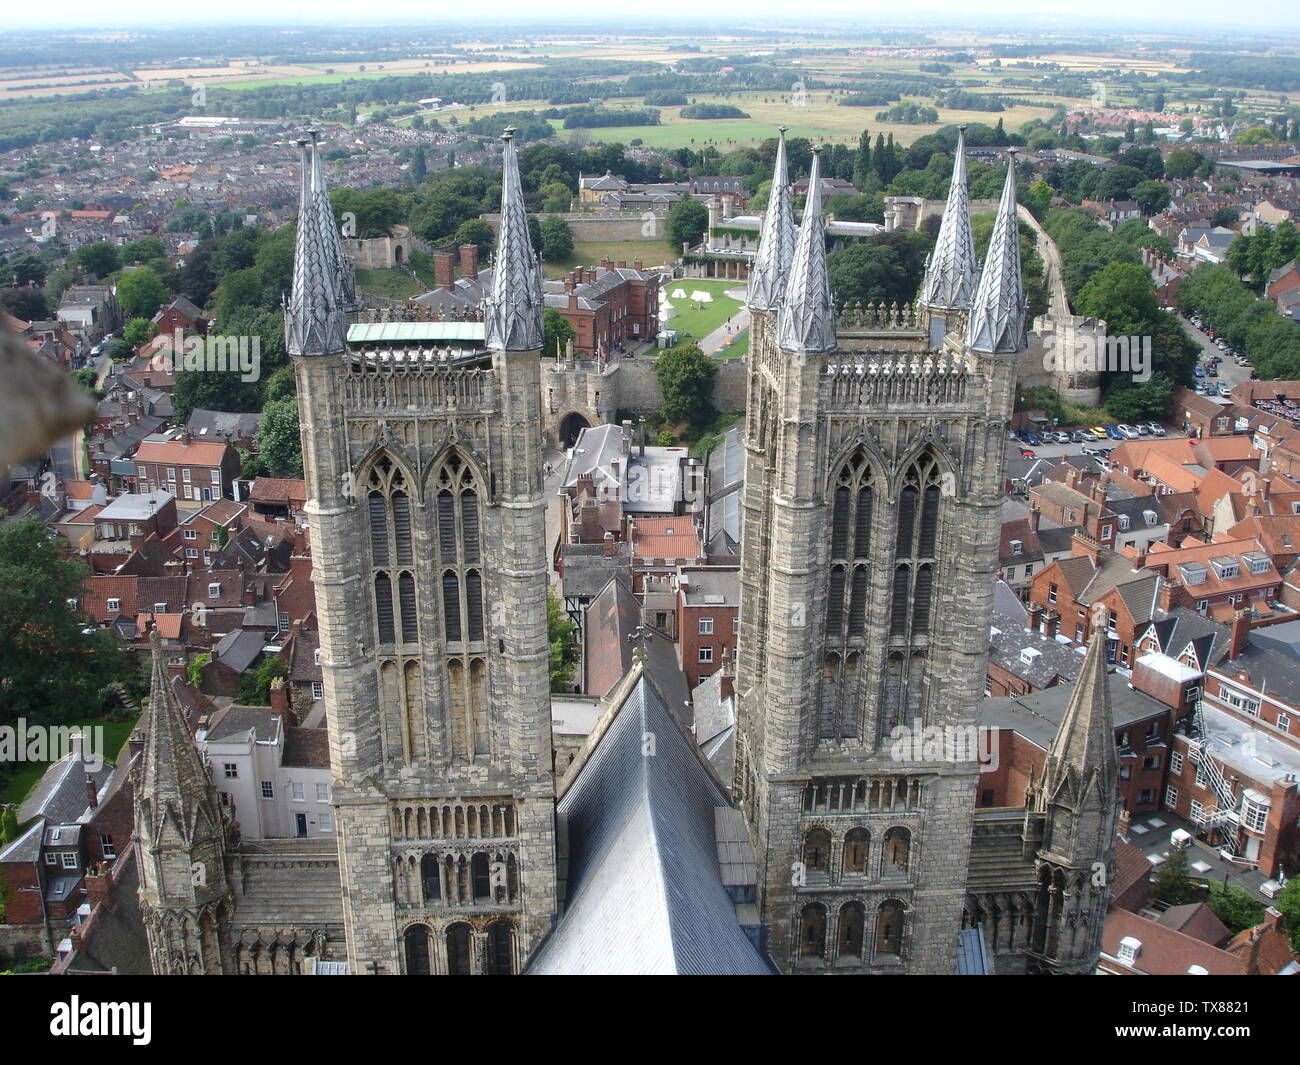 Lincoln Cathedral View From The Main Tower ª œ ª œ œ ÿ Z Z Z œ C English Pedia Http En Pedia Image Lincolntowerview Jpg Http En Pedia User Lordharris Stock Photo Alamy